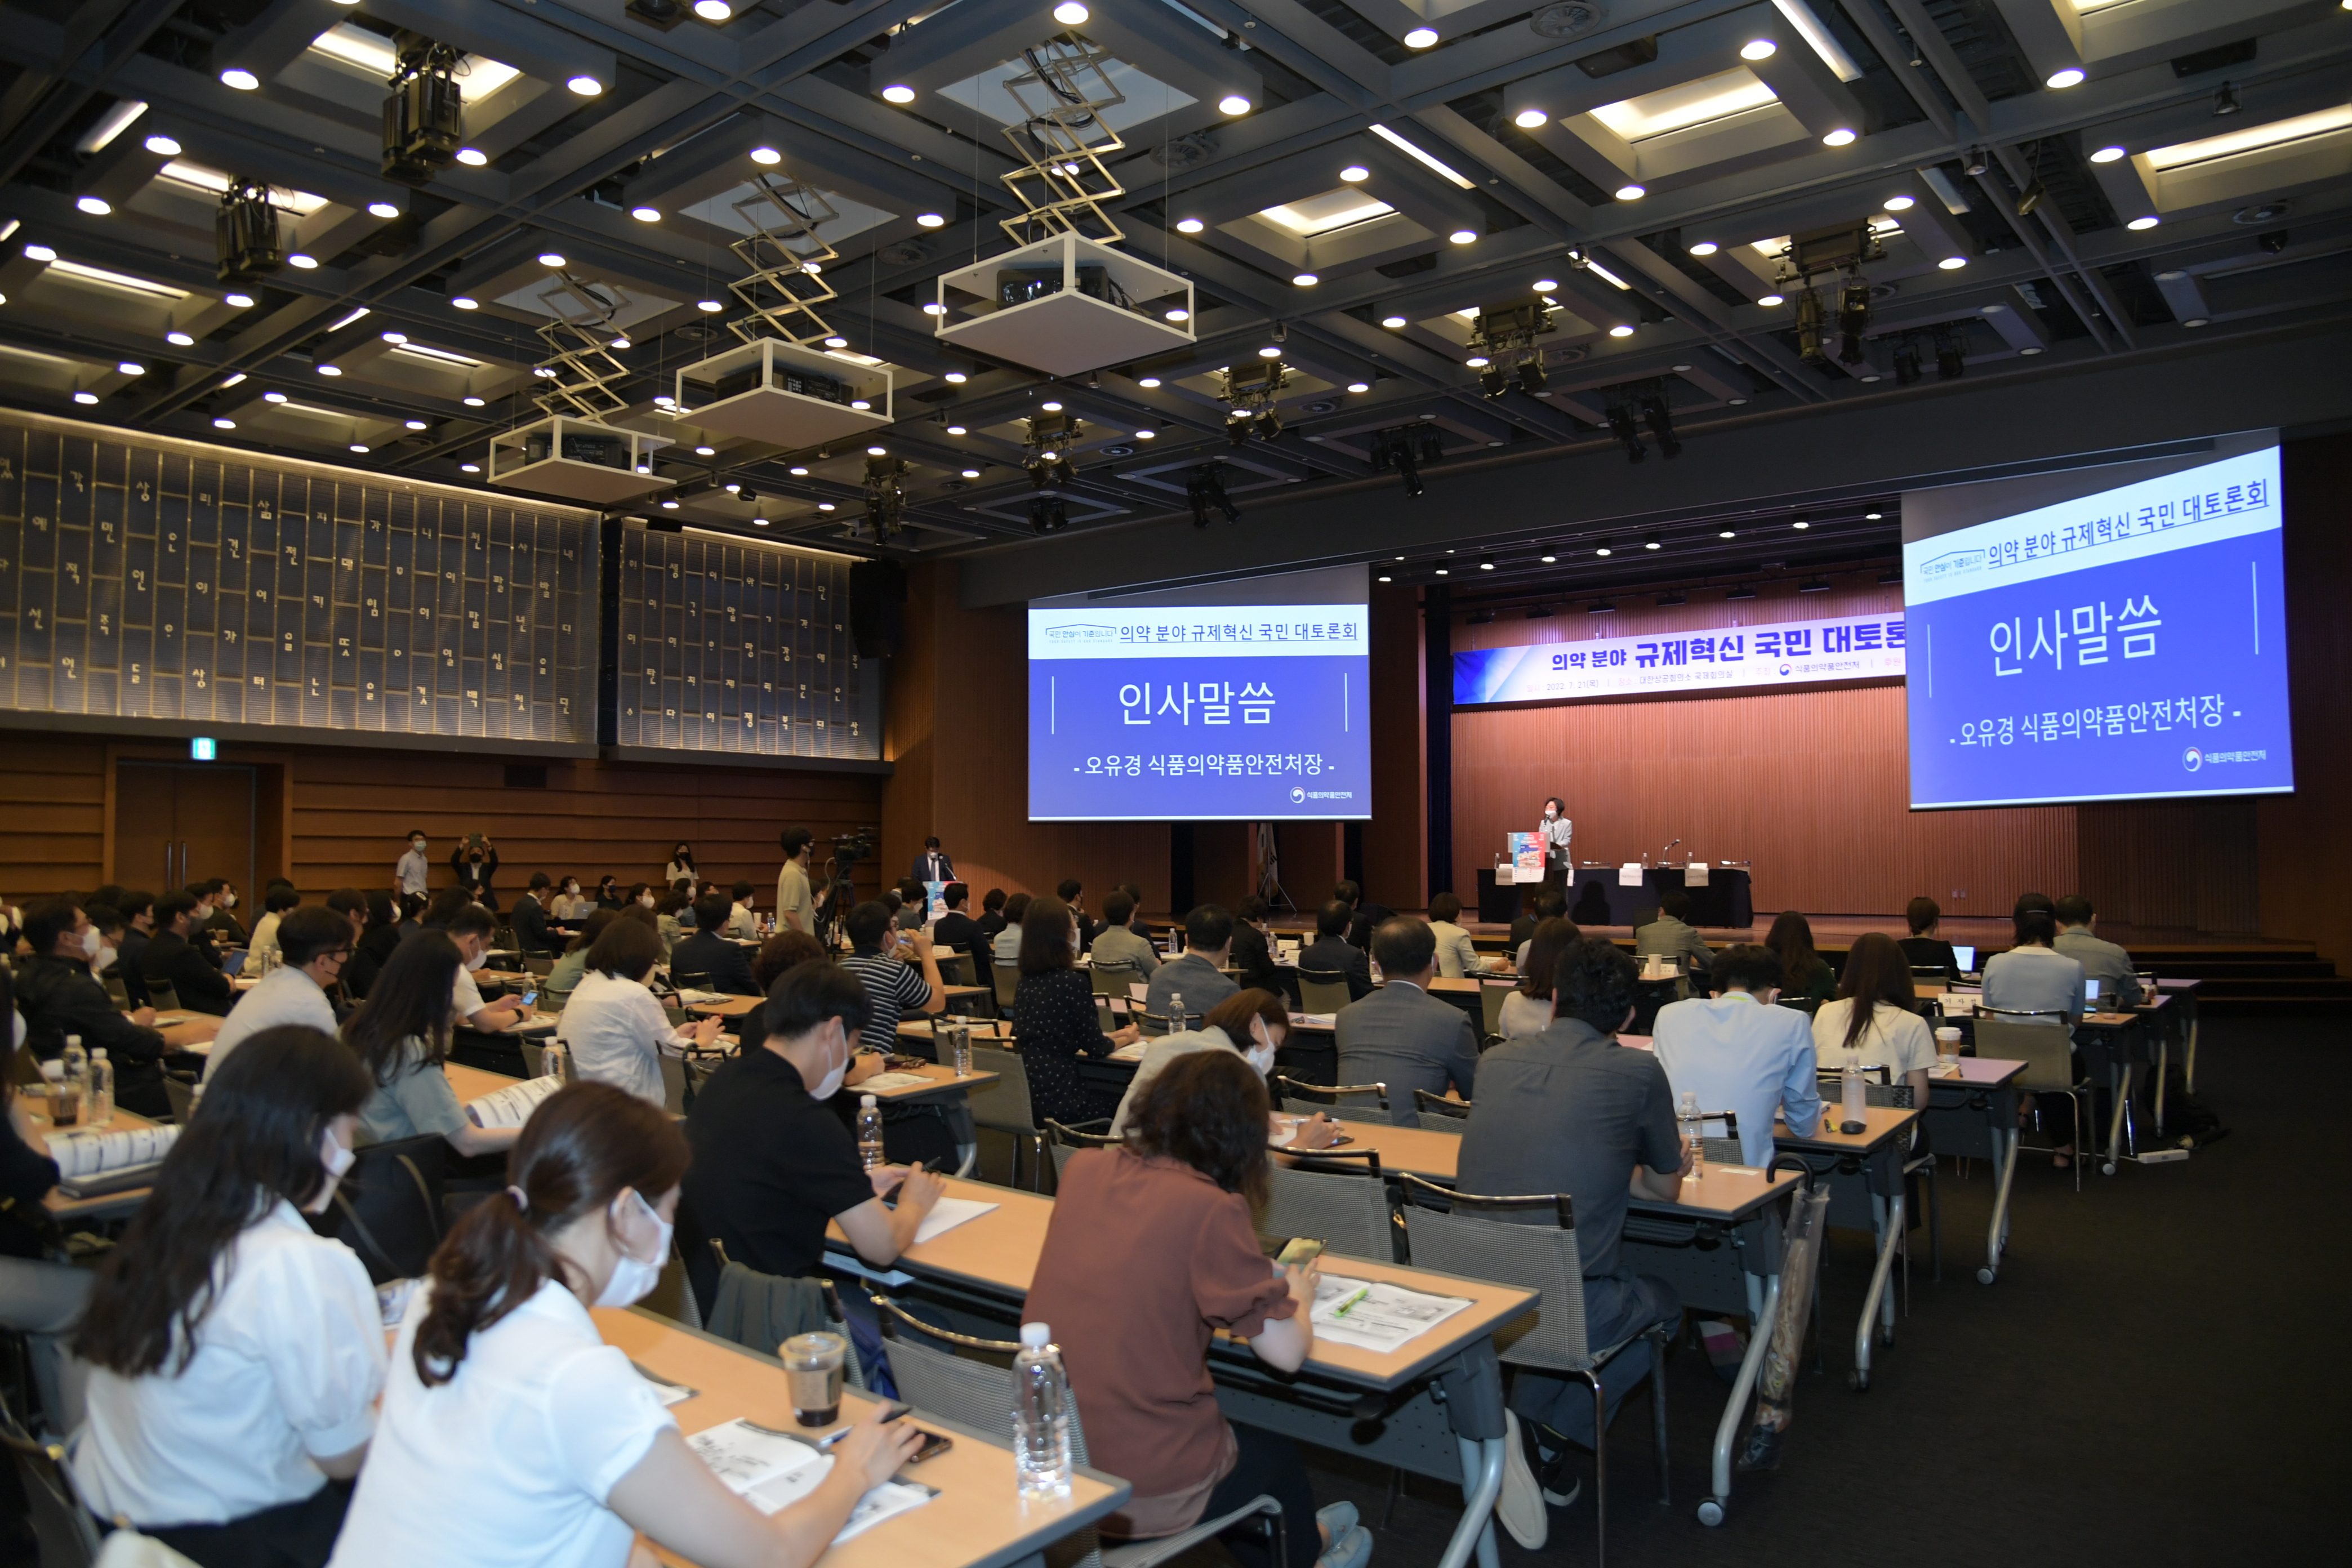 Photo News5 - [July 21, 2022] Minister Attends Public Consultation on Regulatory Innovation of the Medical Product Field